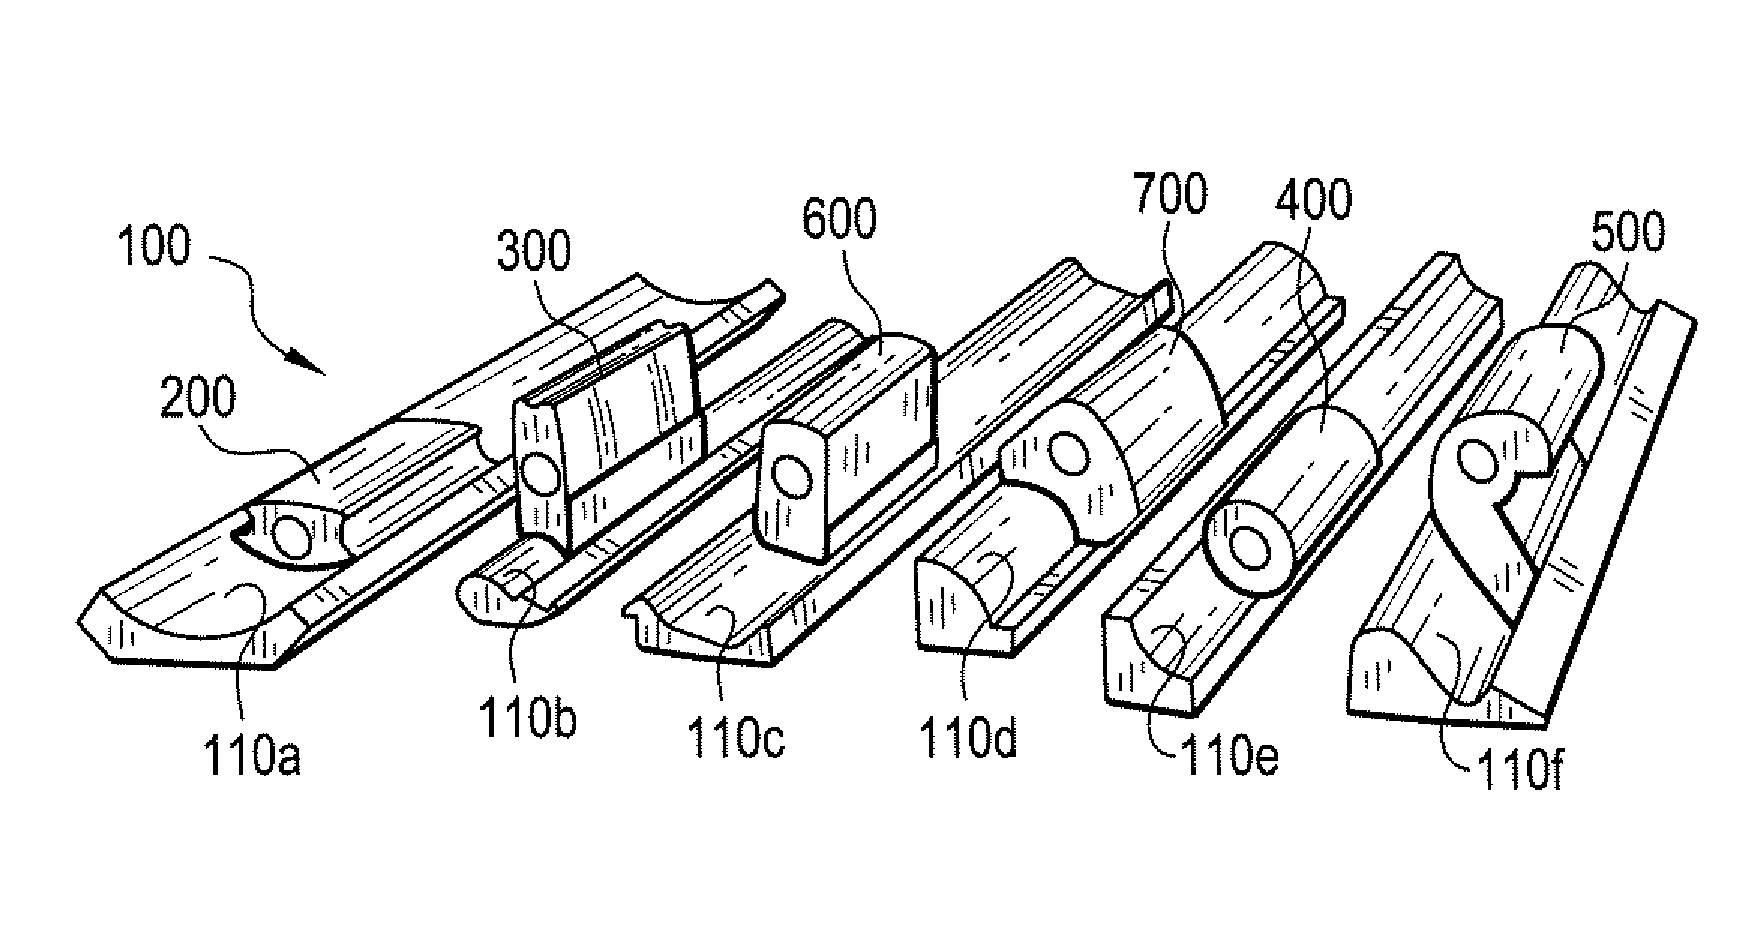 Sanding blocks for use with adhesive-backed sandpaper